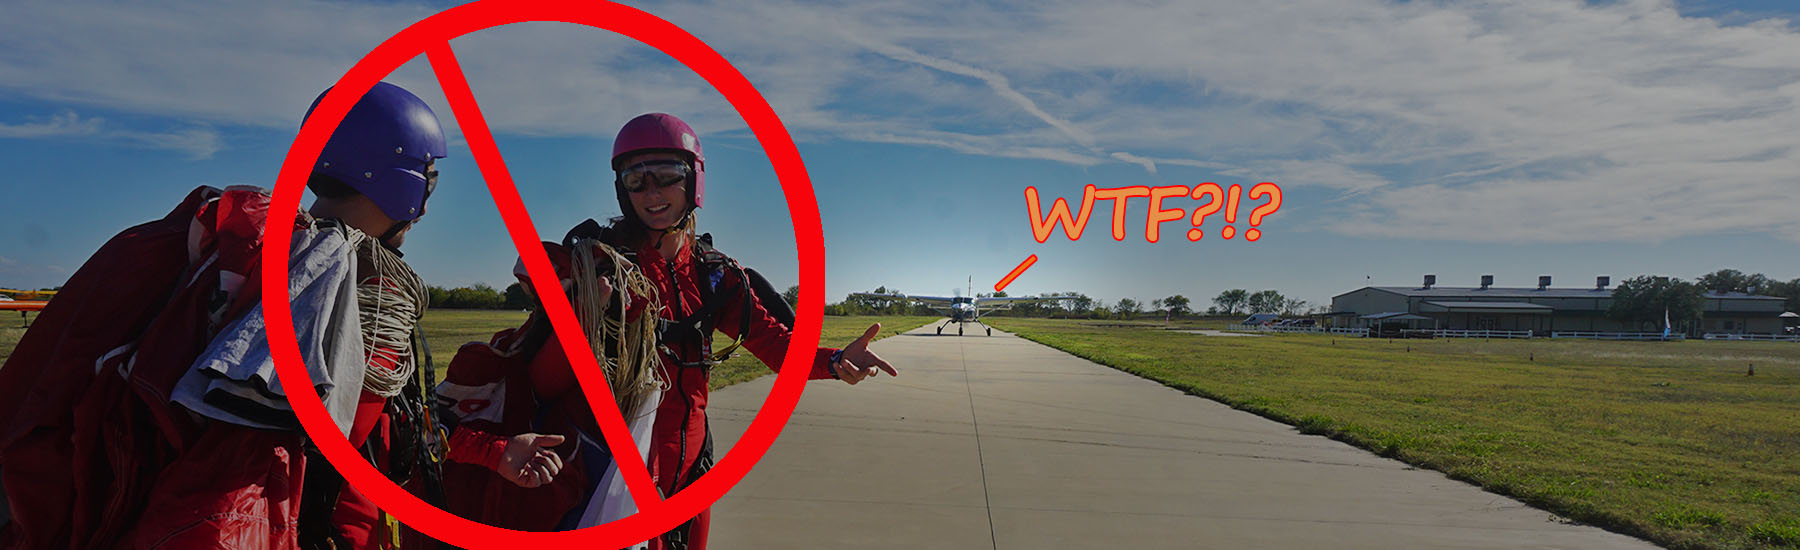 Skydiver runway incursion (staged)